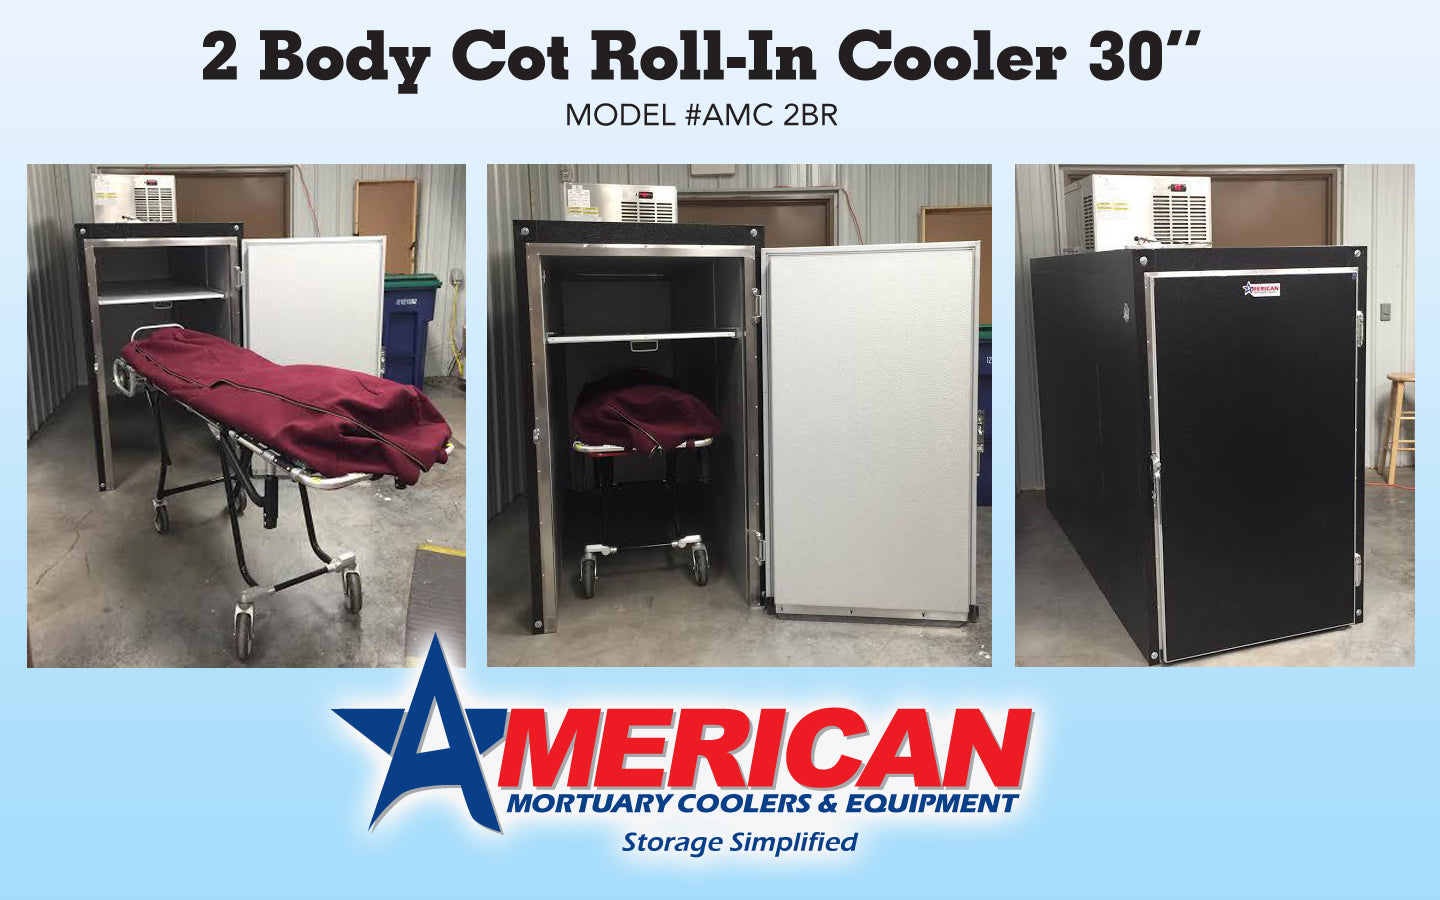 American Mortuary Cooler pictured in upgraded black exterior